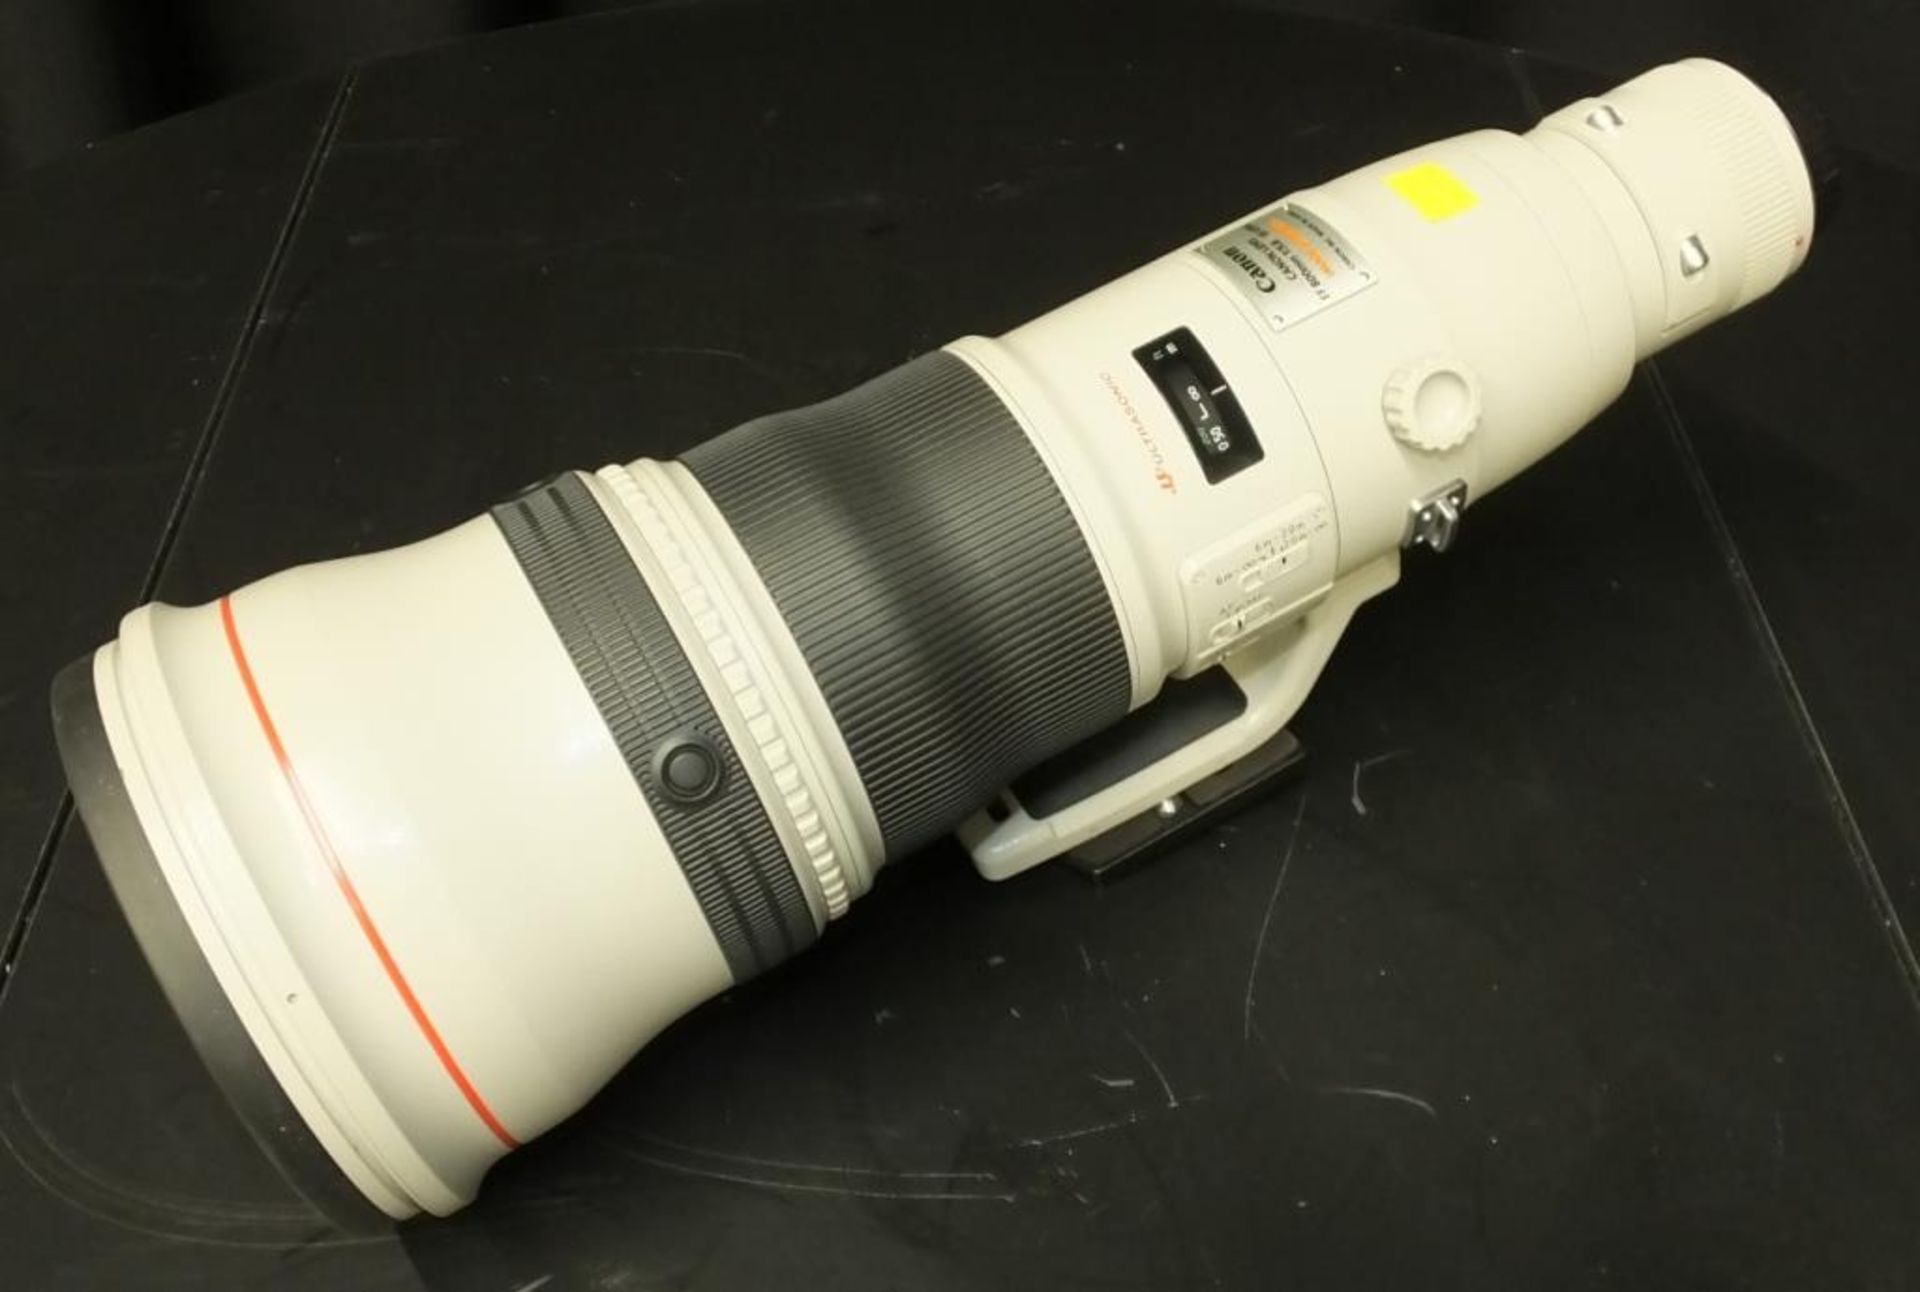 Canon lens EF 800mm - 1:5.6 L IS USM - Image stabilizer - ultrasonic - serial 18325 - Image 2 of 18